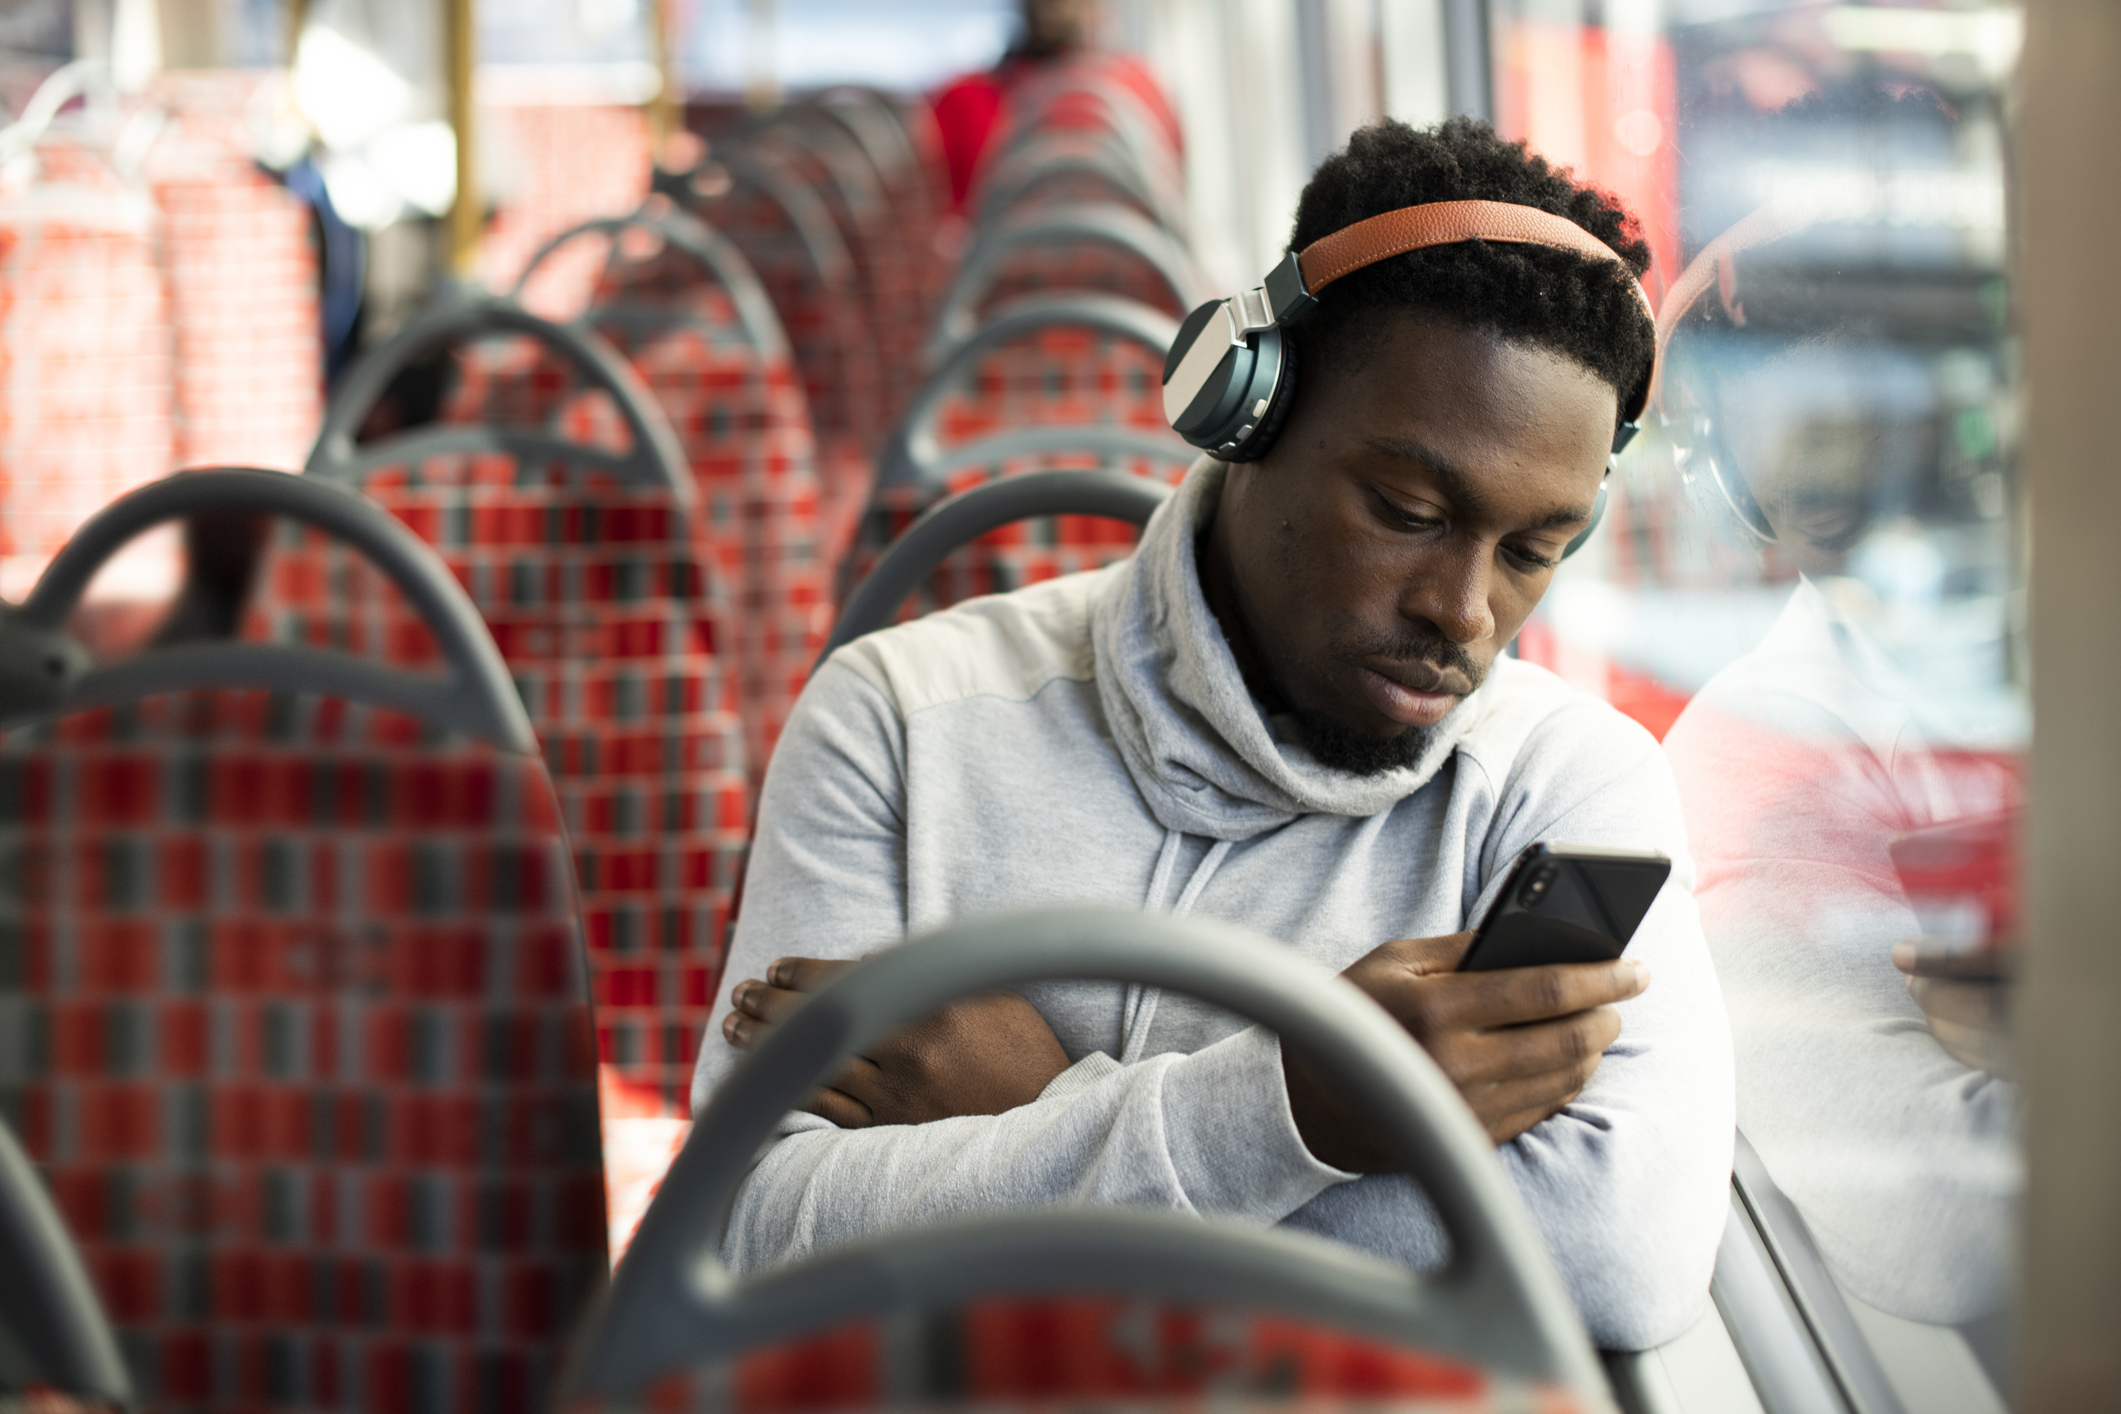 A man sitting on a bus listening to music on headphones whilst using his mobile phone